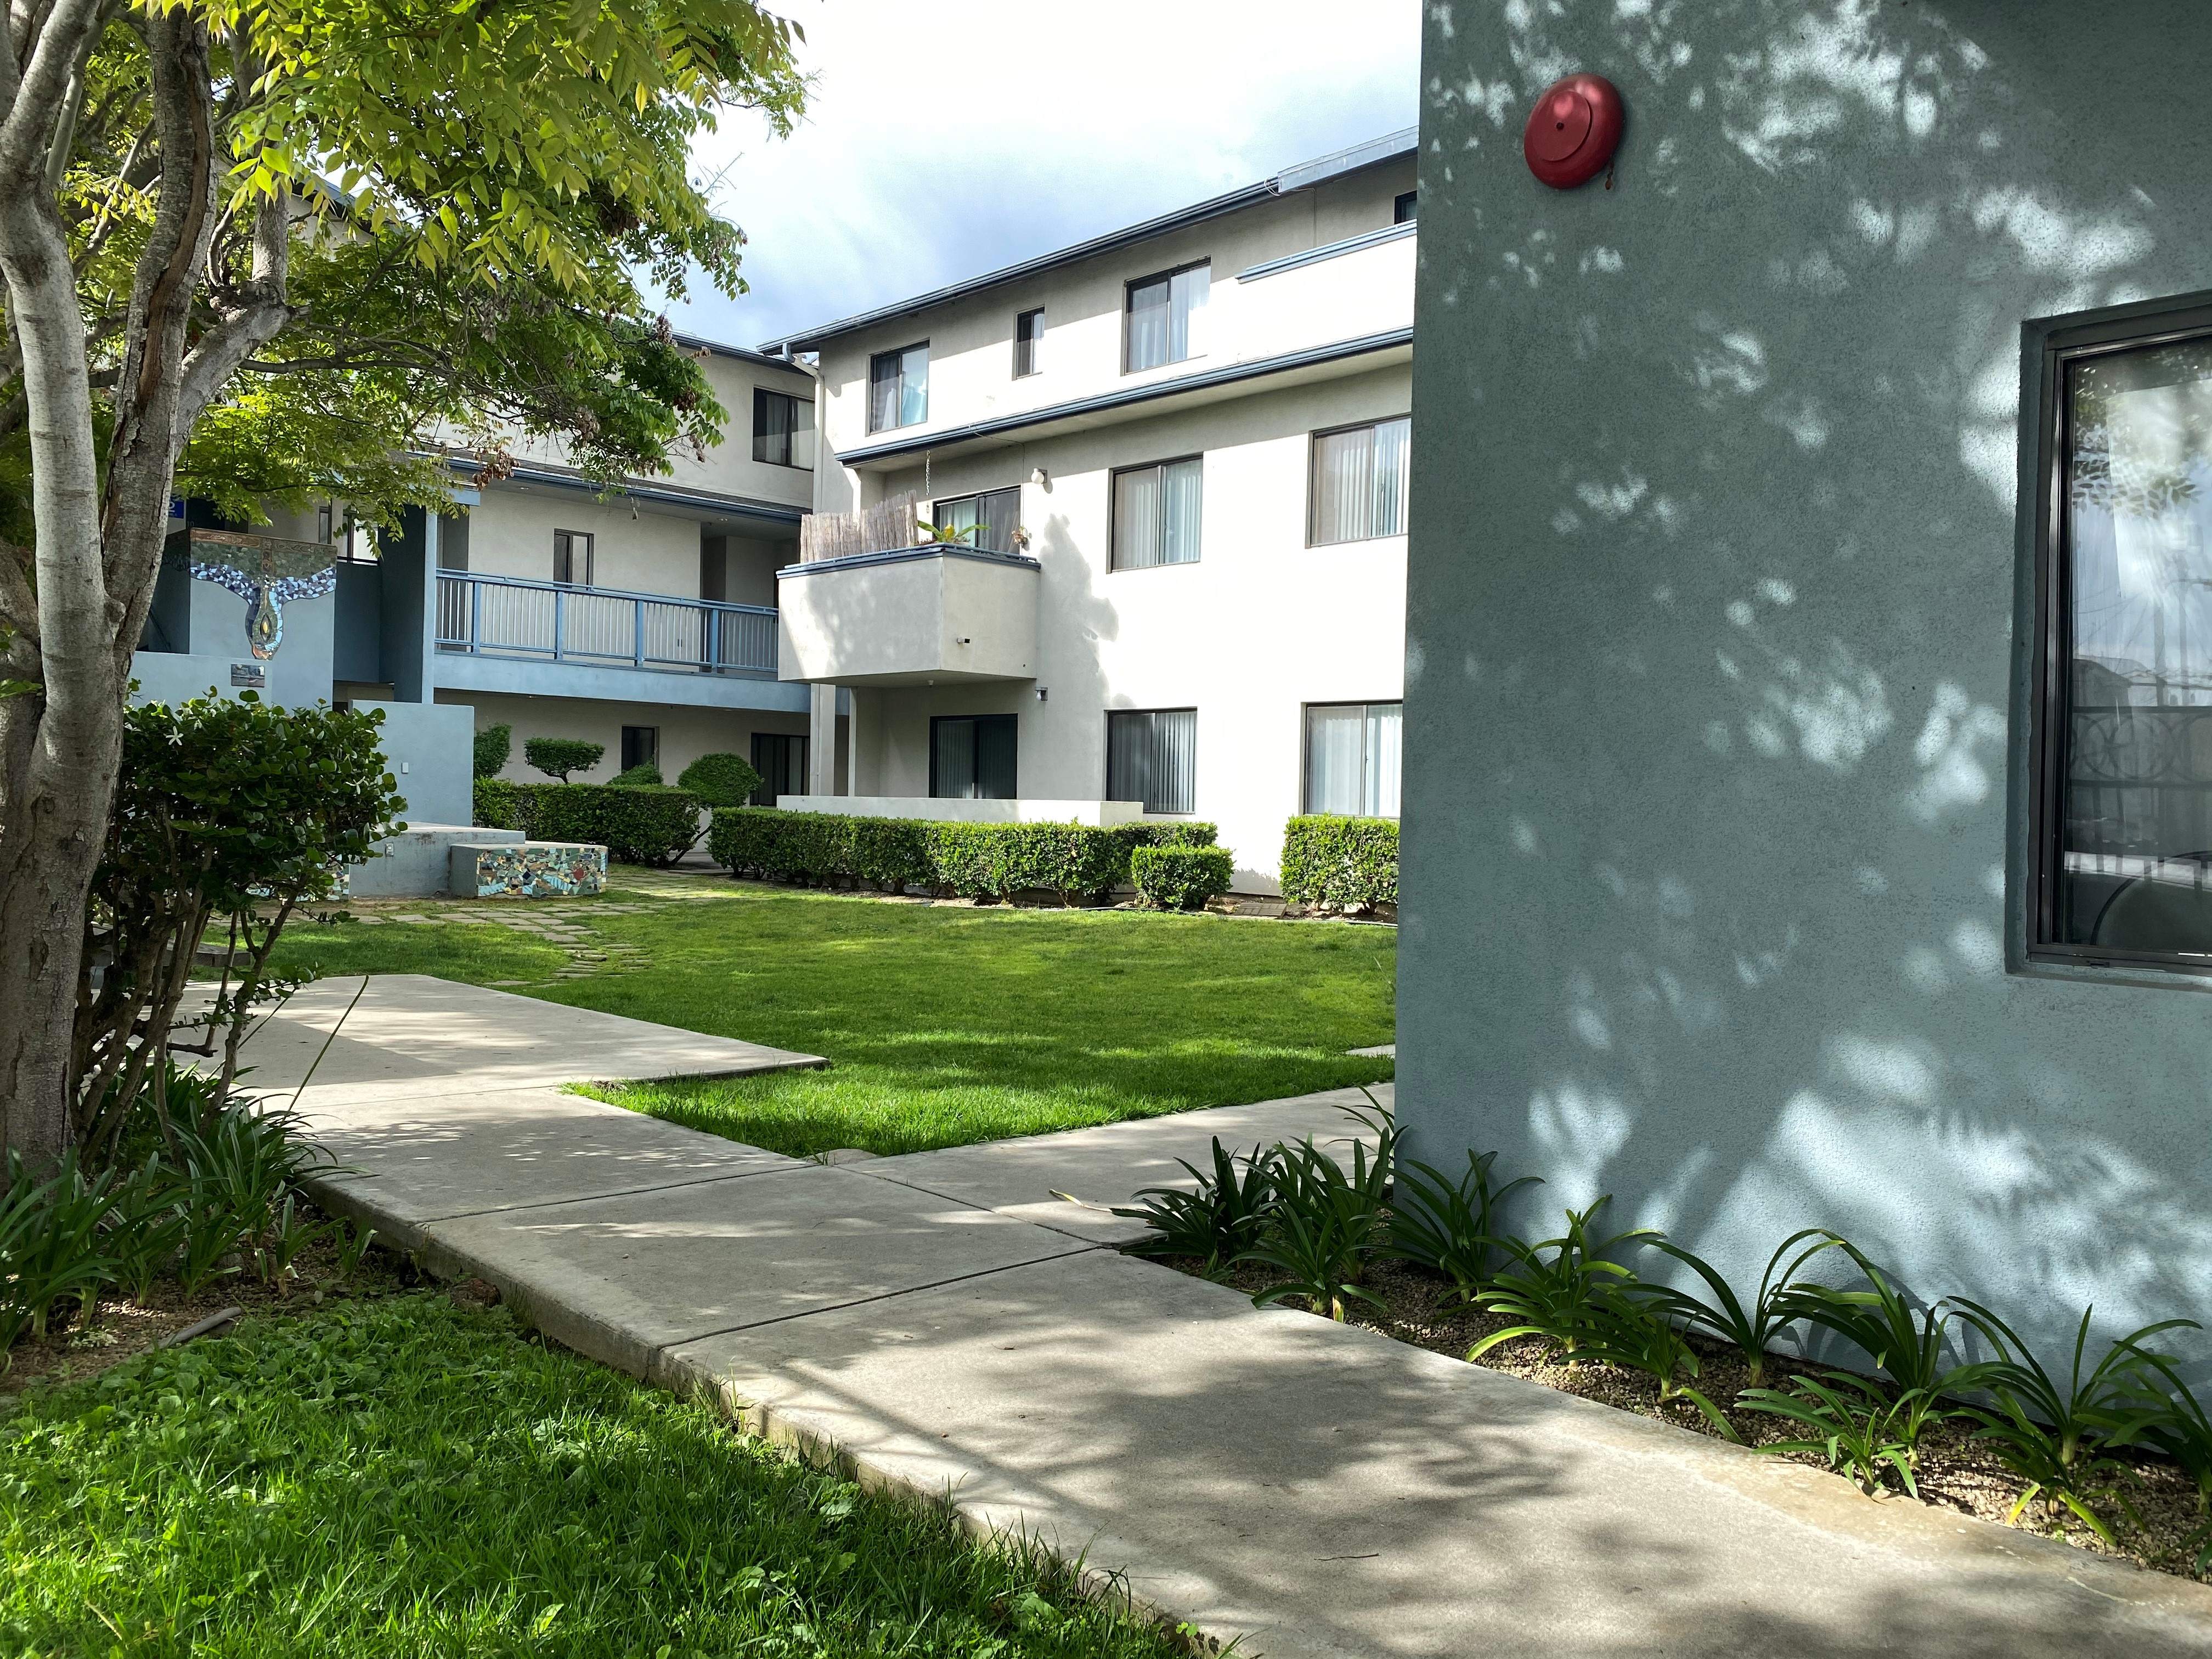 Courtyard of a three story building. There is a open grass area with adjacent bushes and trees. There is a cement passageway that leads to the units.